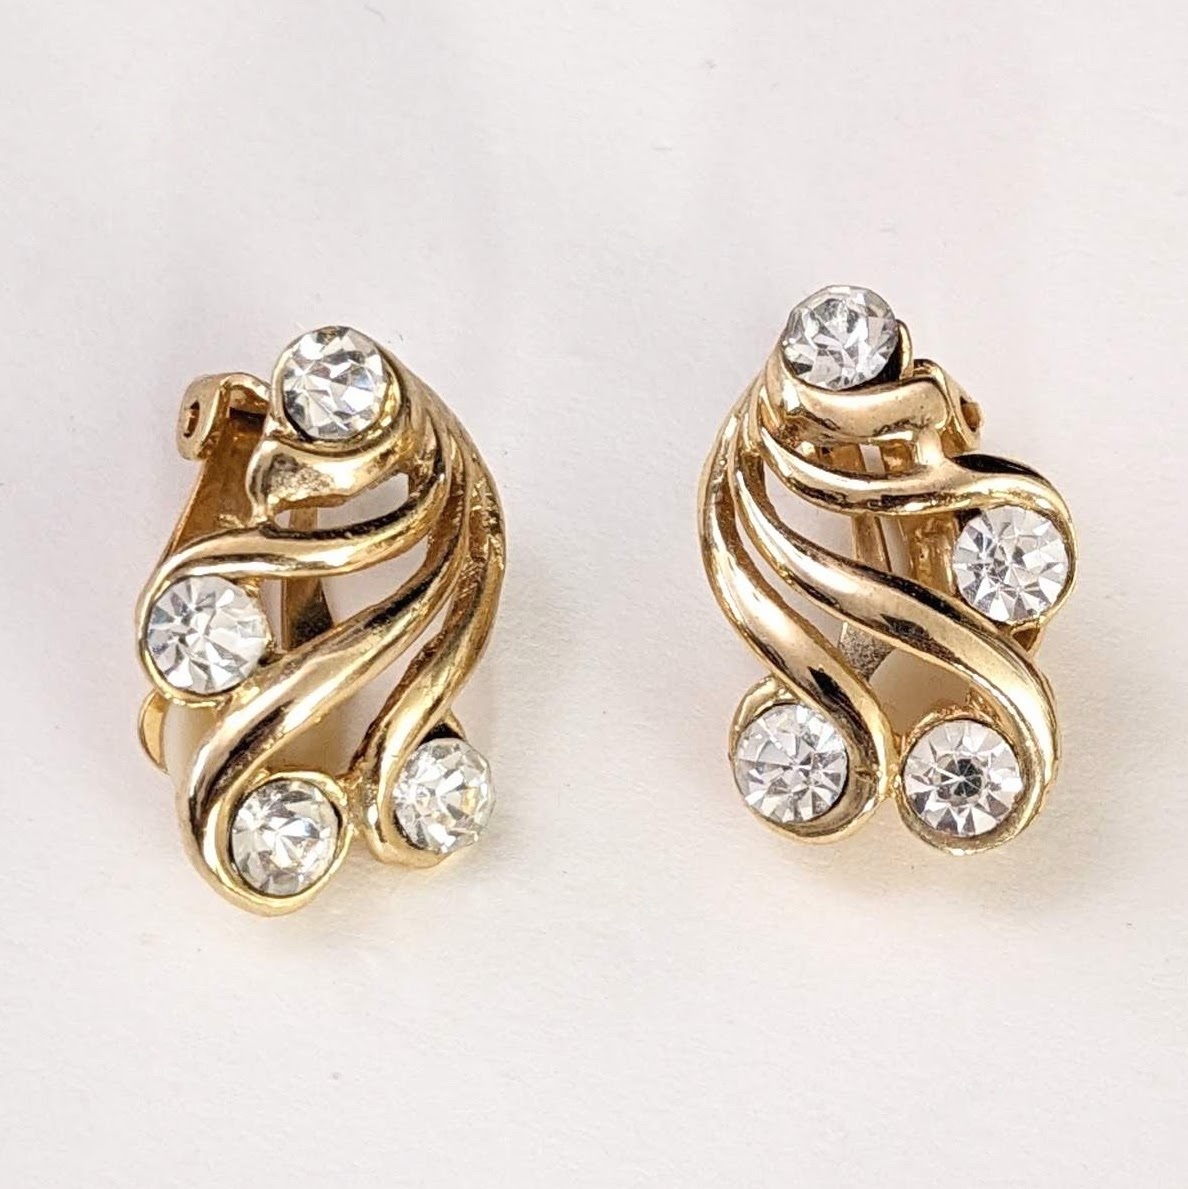 Primary image for Vintage Rhinestone and Gold Swirl Clip-On Earrings, 1 in.